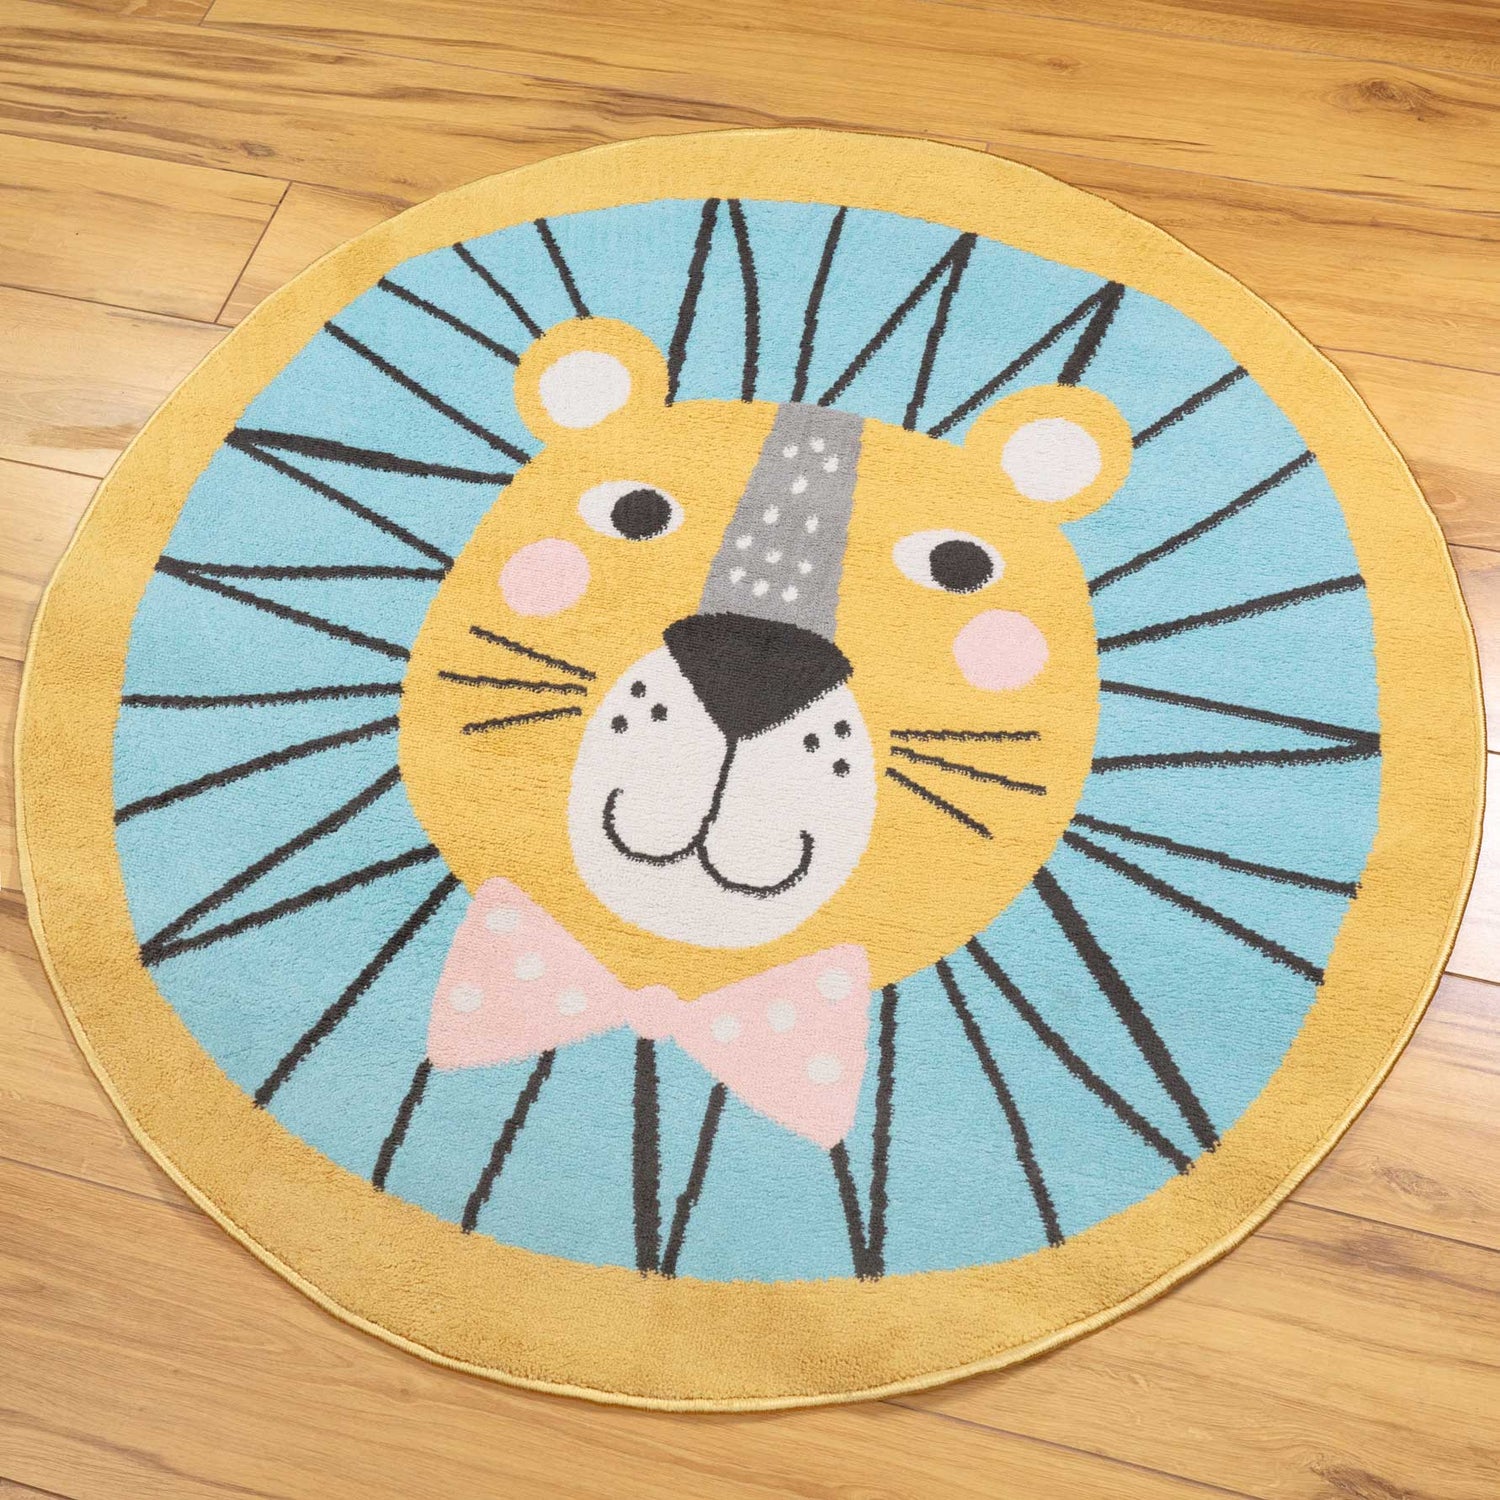 Circle Lion Face Soft Round Kids Bedroom Rugs